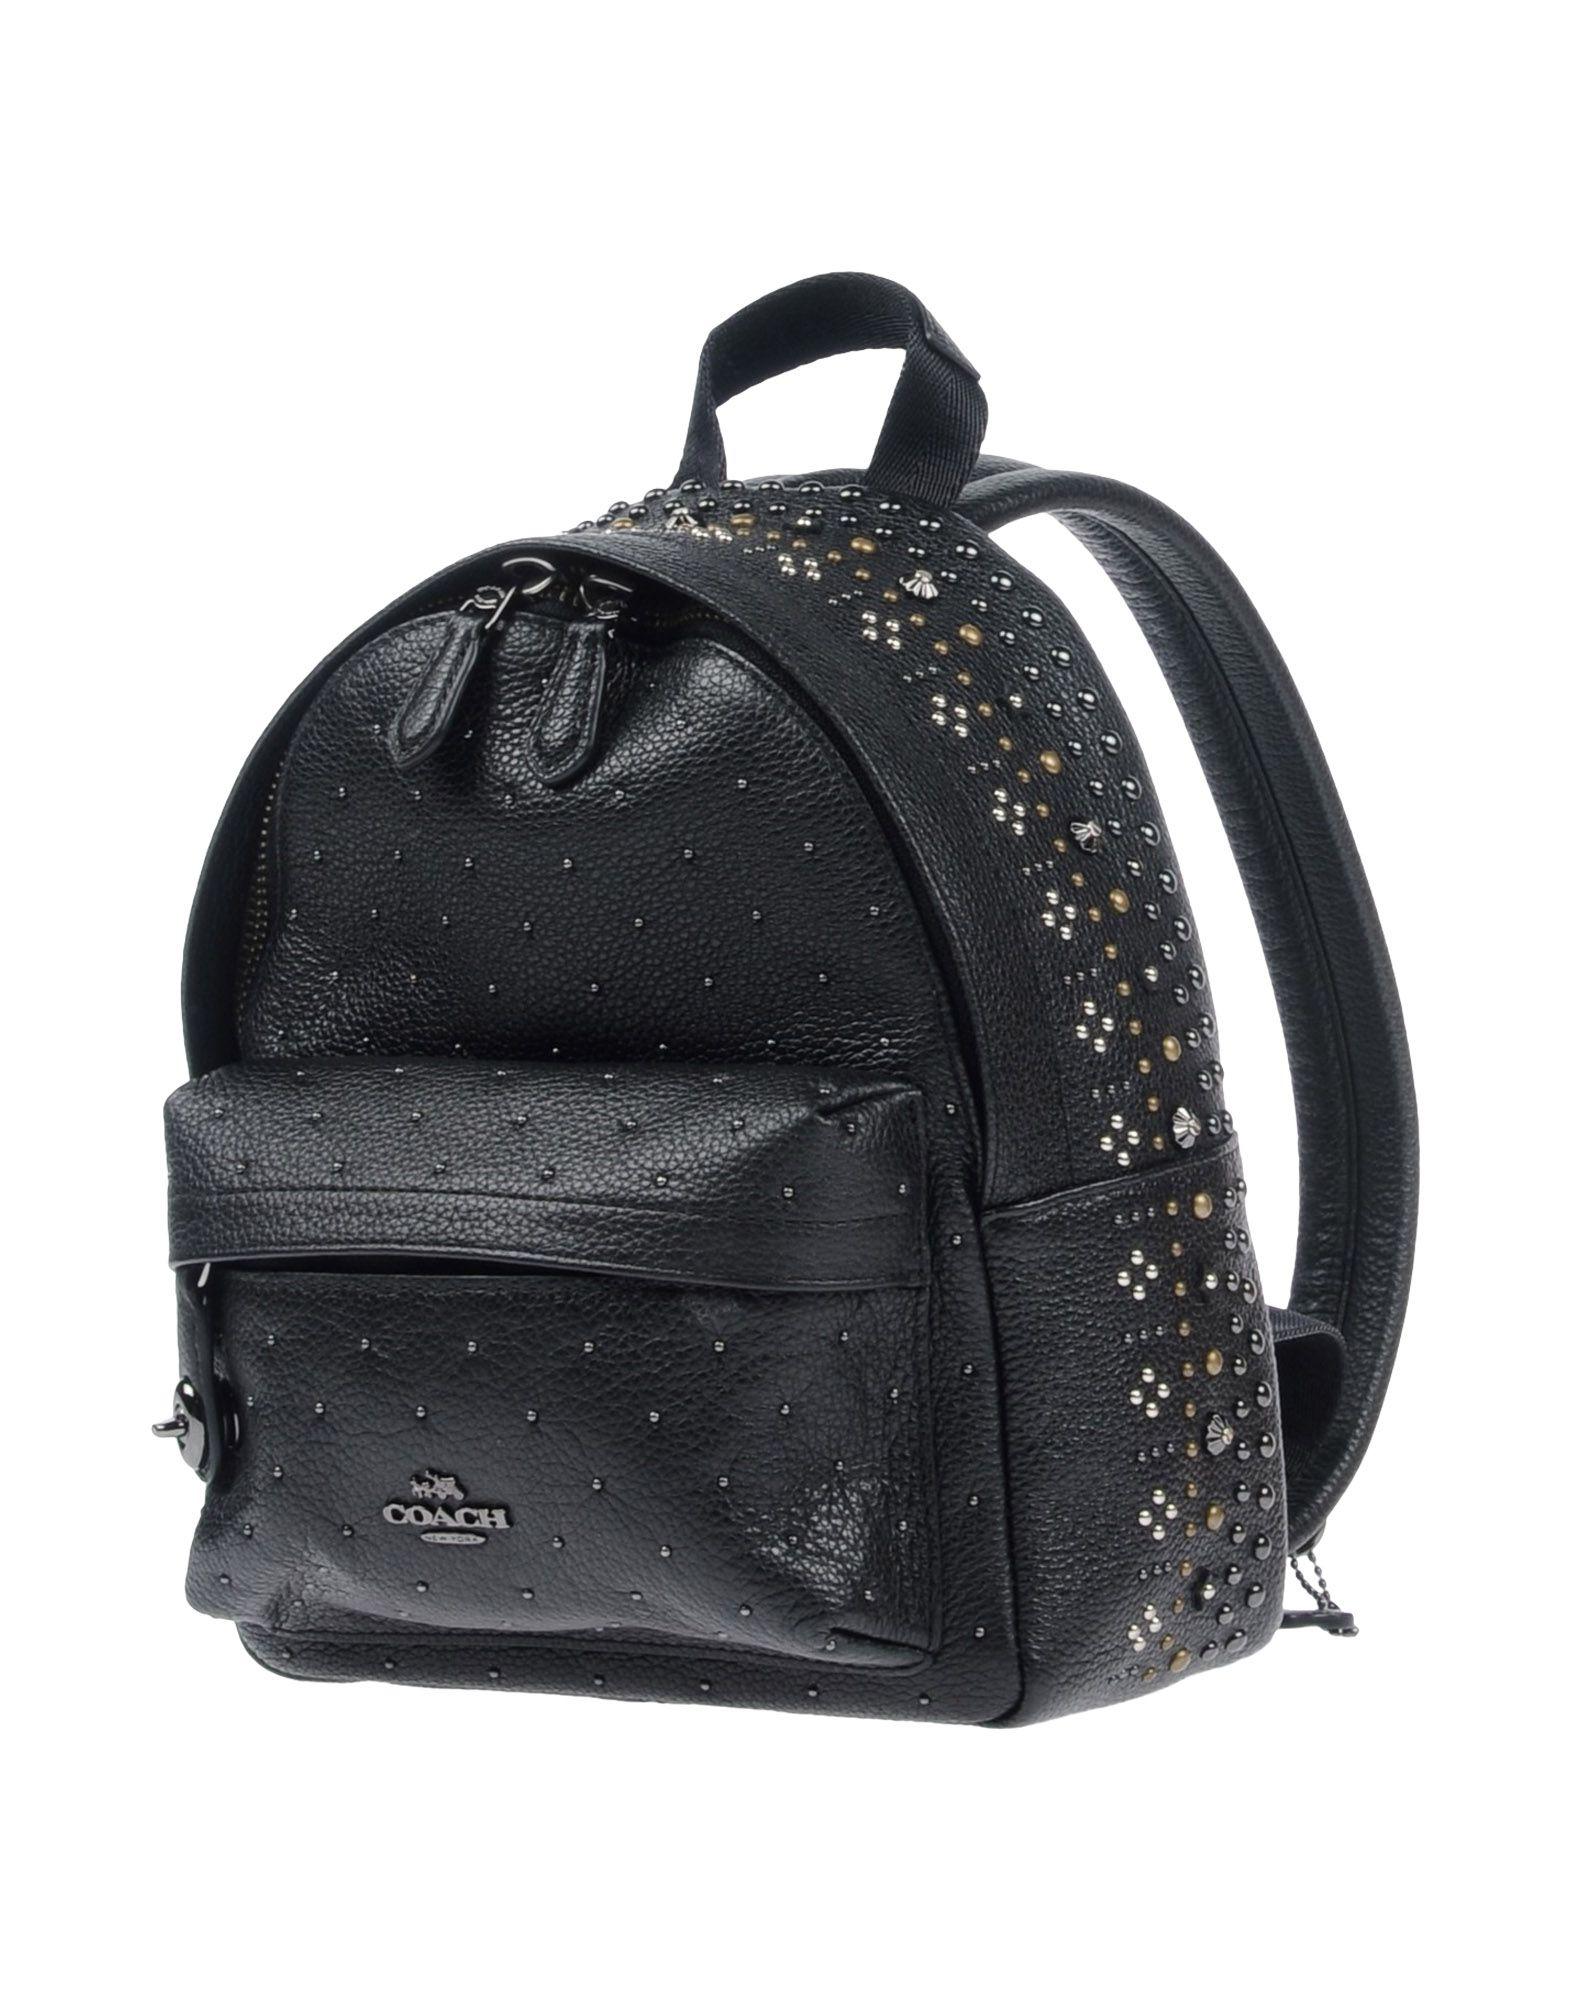 COACH Leather Backpacks & Fanny Packs in Black - Lyst